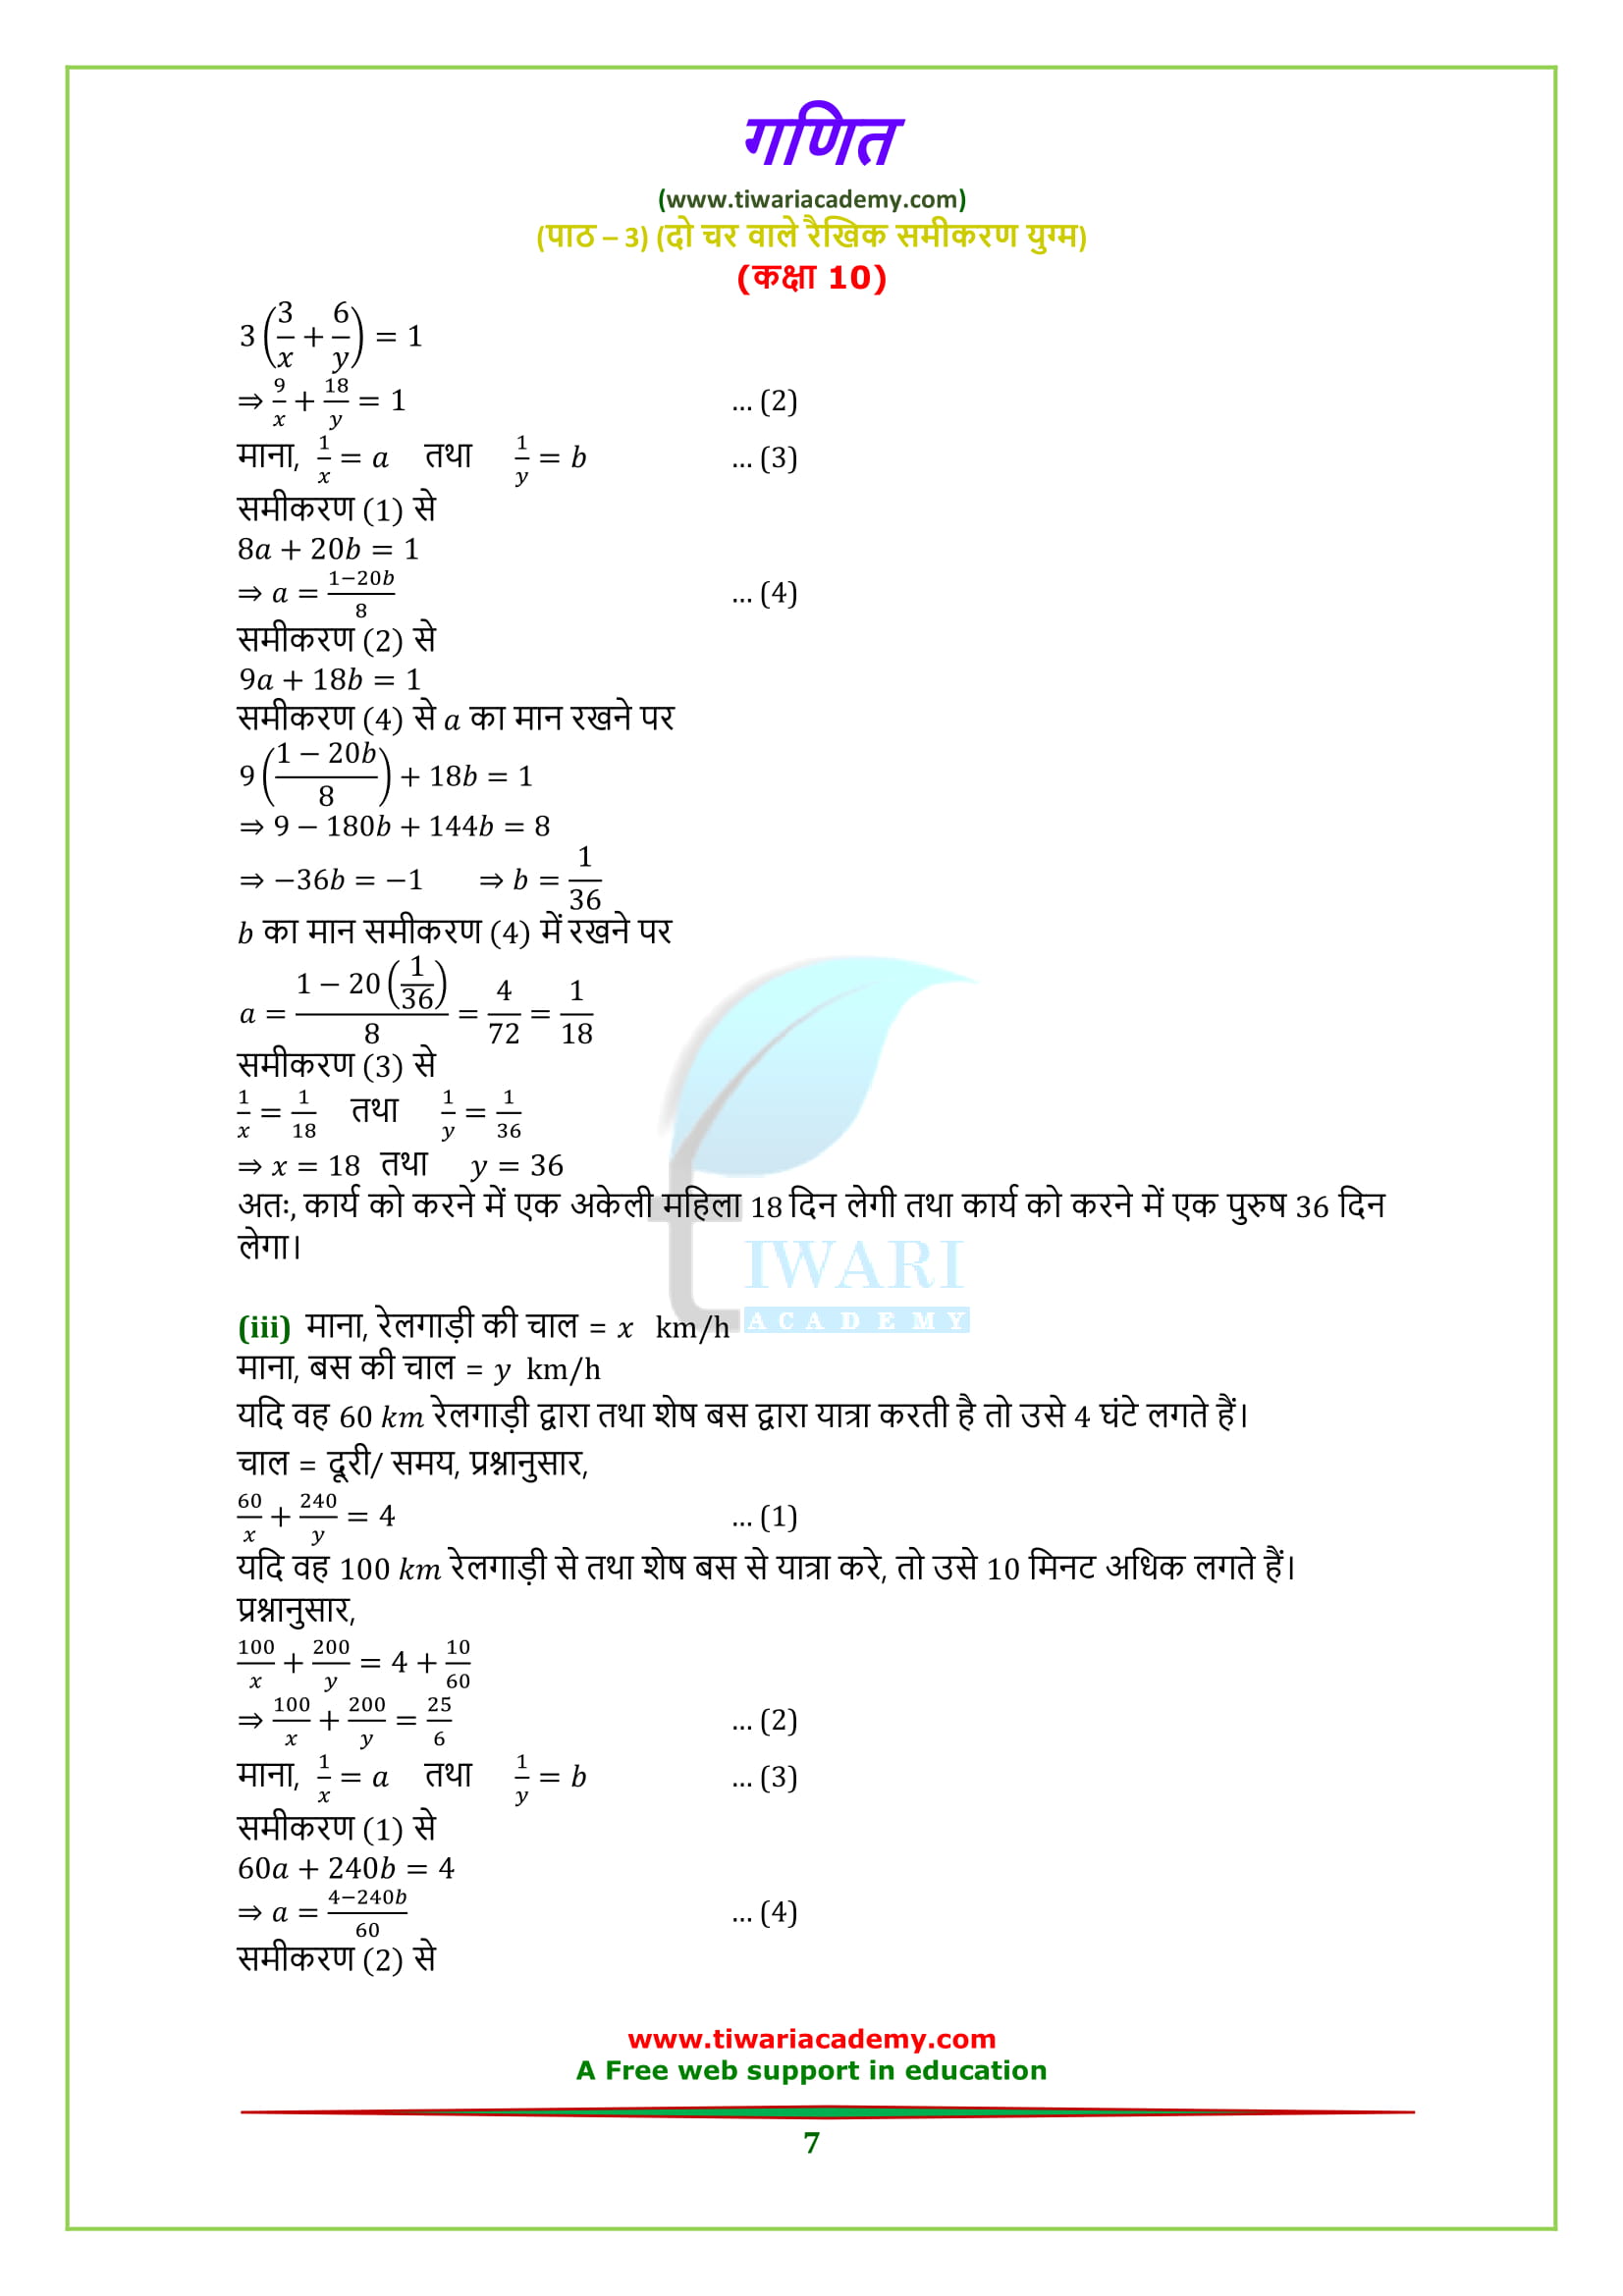 Class 10 maths chapter 3 exercise 3.6 solutions in Hindi word problems